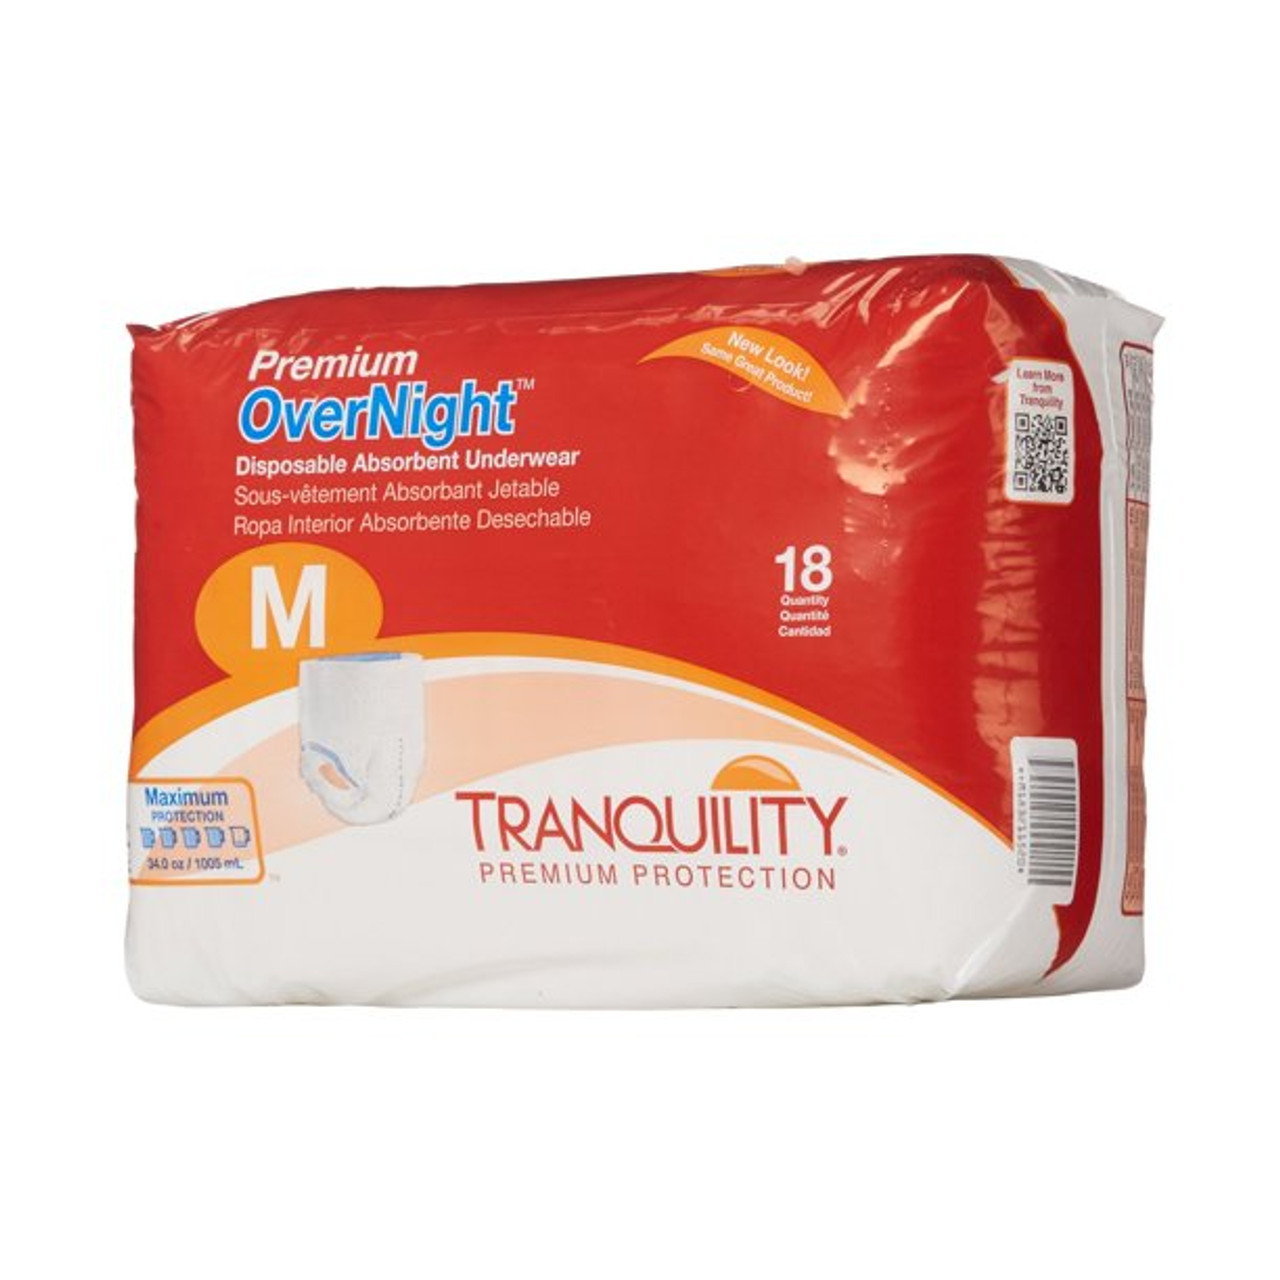 Tranquility 2115 Tranquility Premium OverNight Disposable Absorbent Underwear Medium, 4x18s